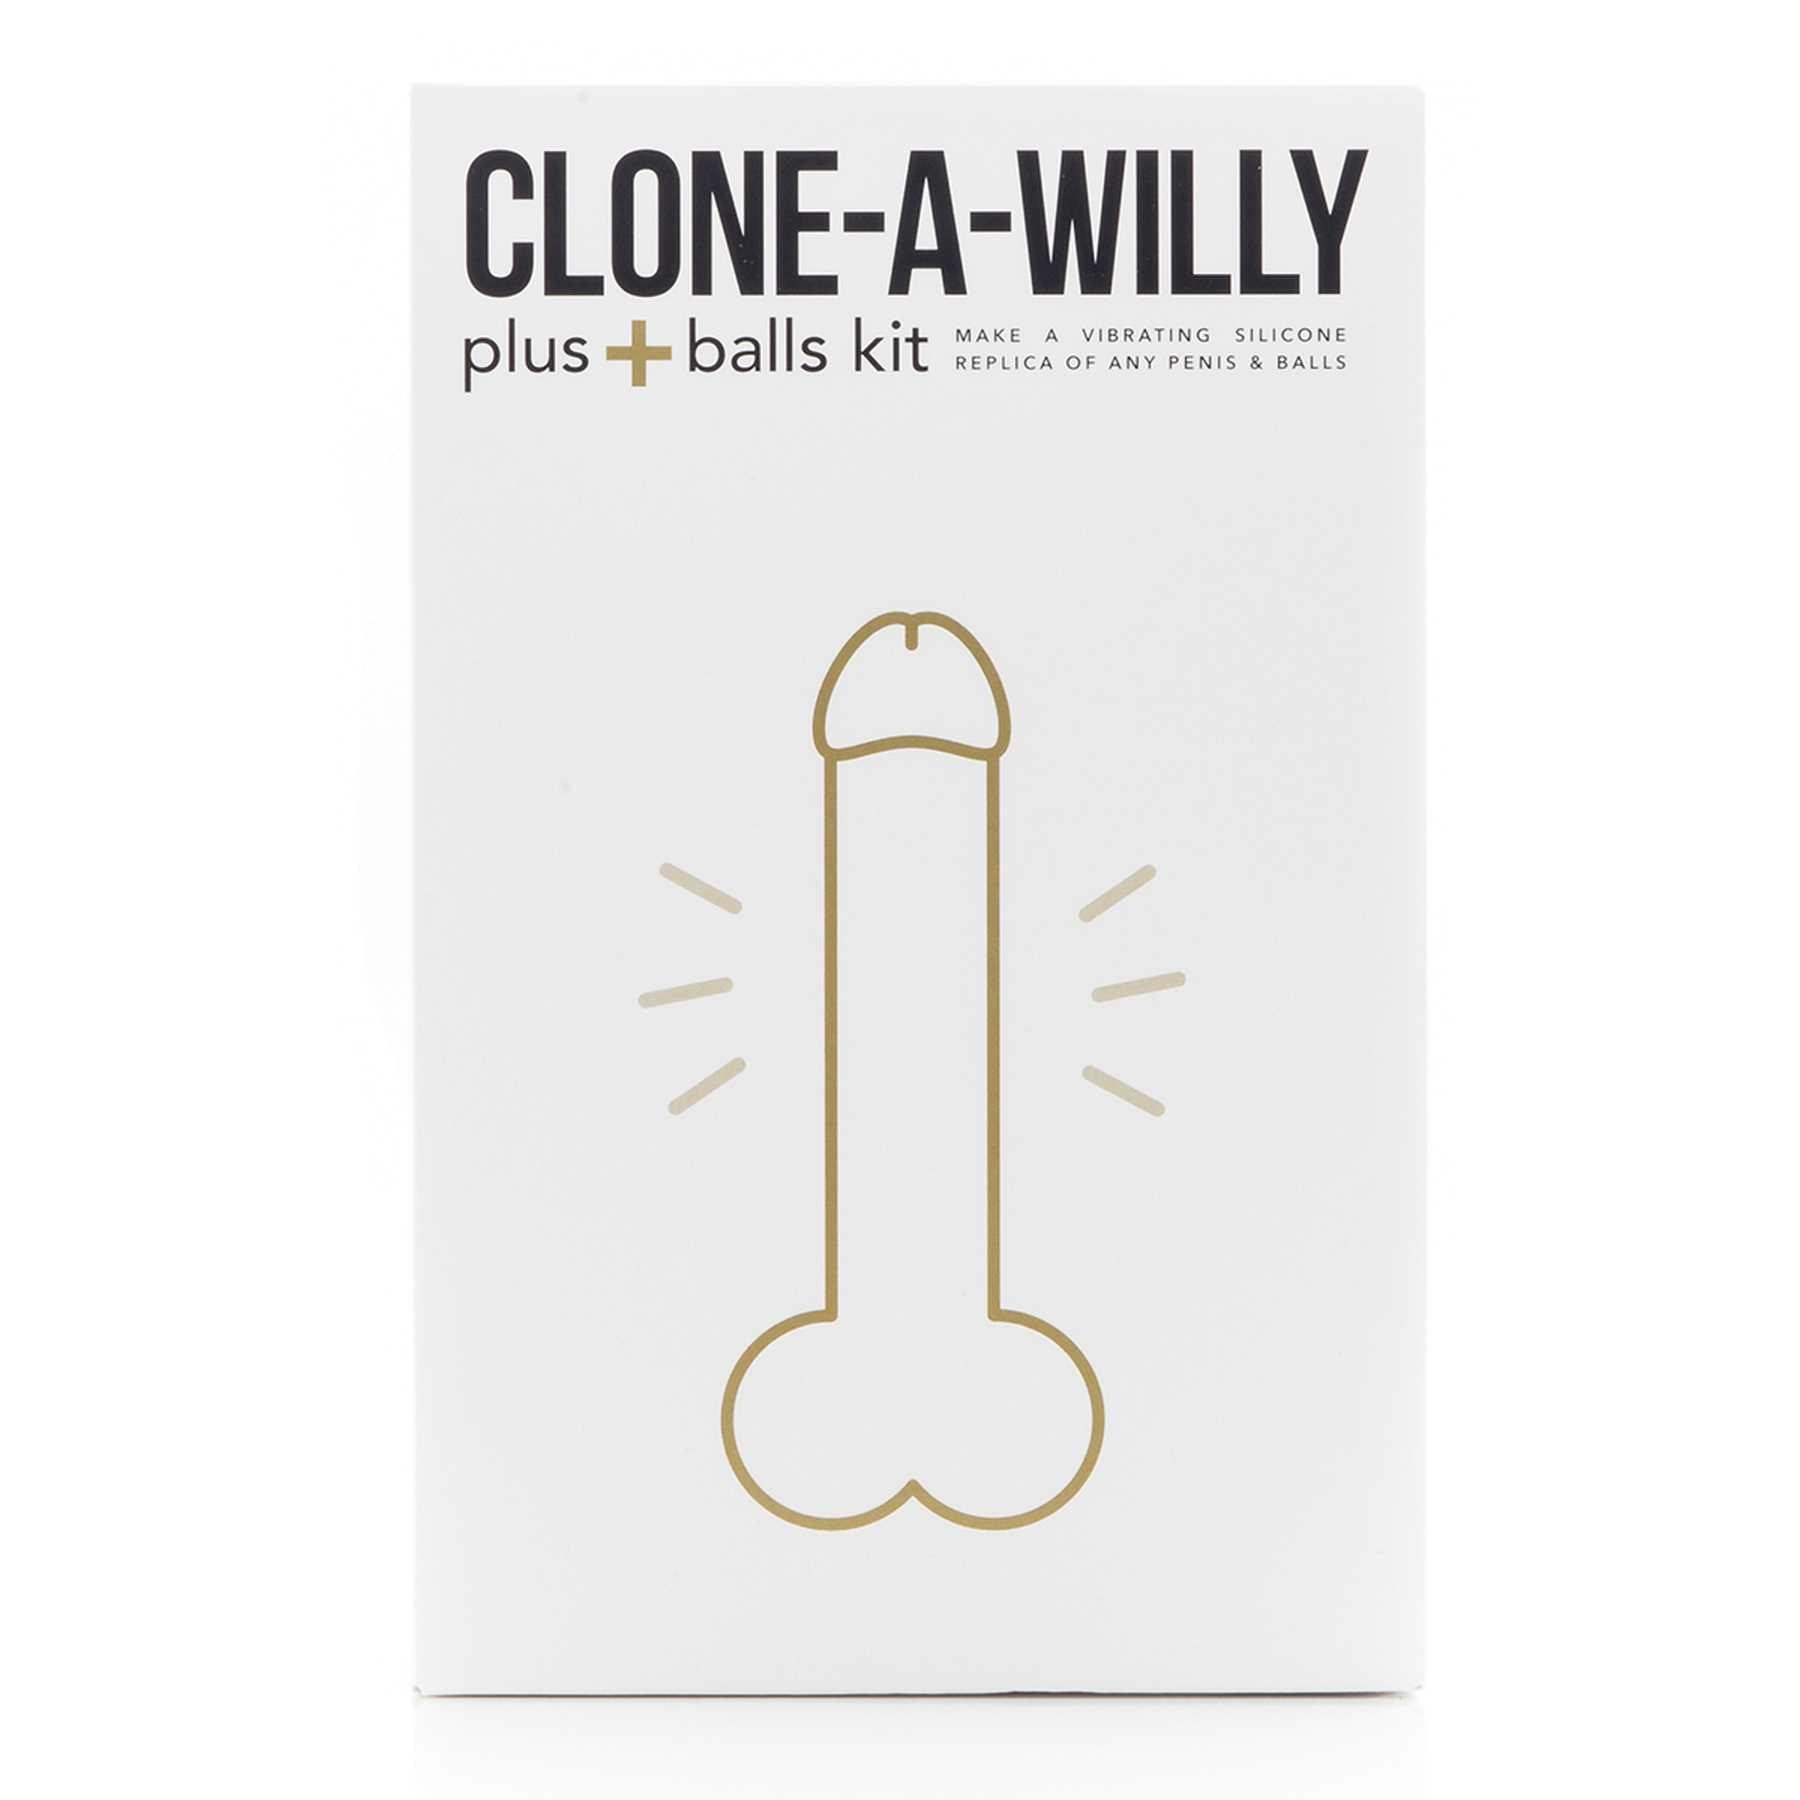 Clone-A-Willy Plus Balls Kit